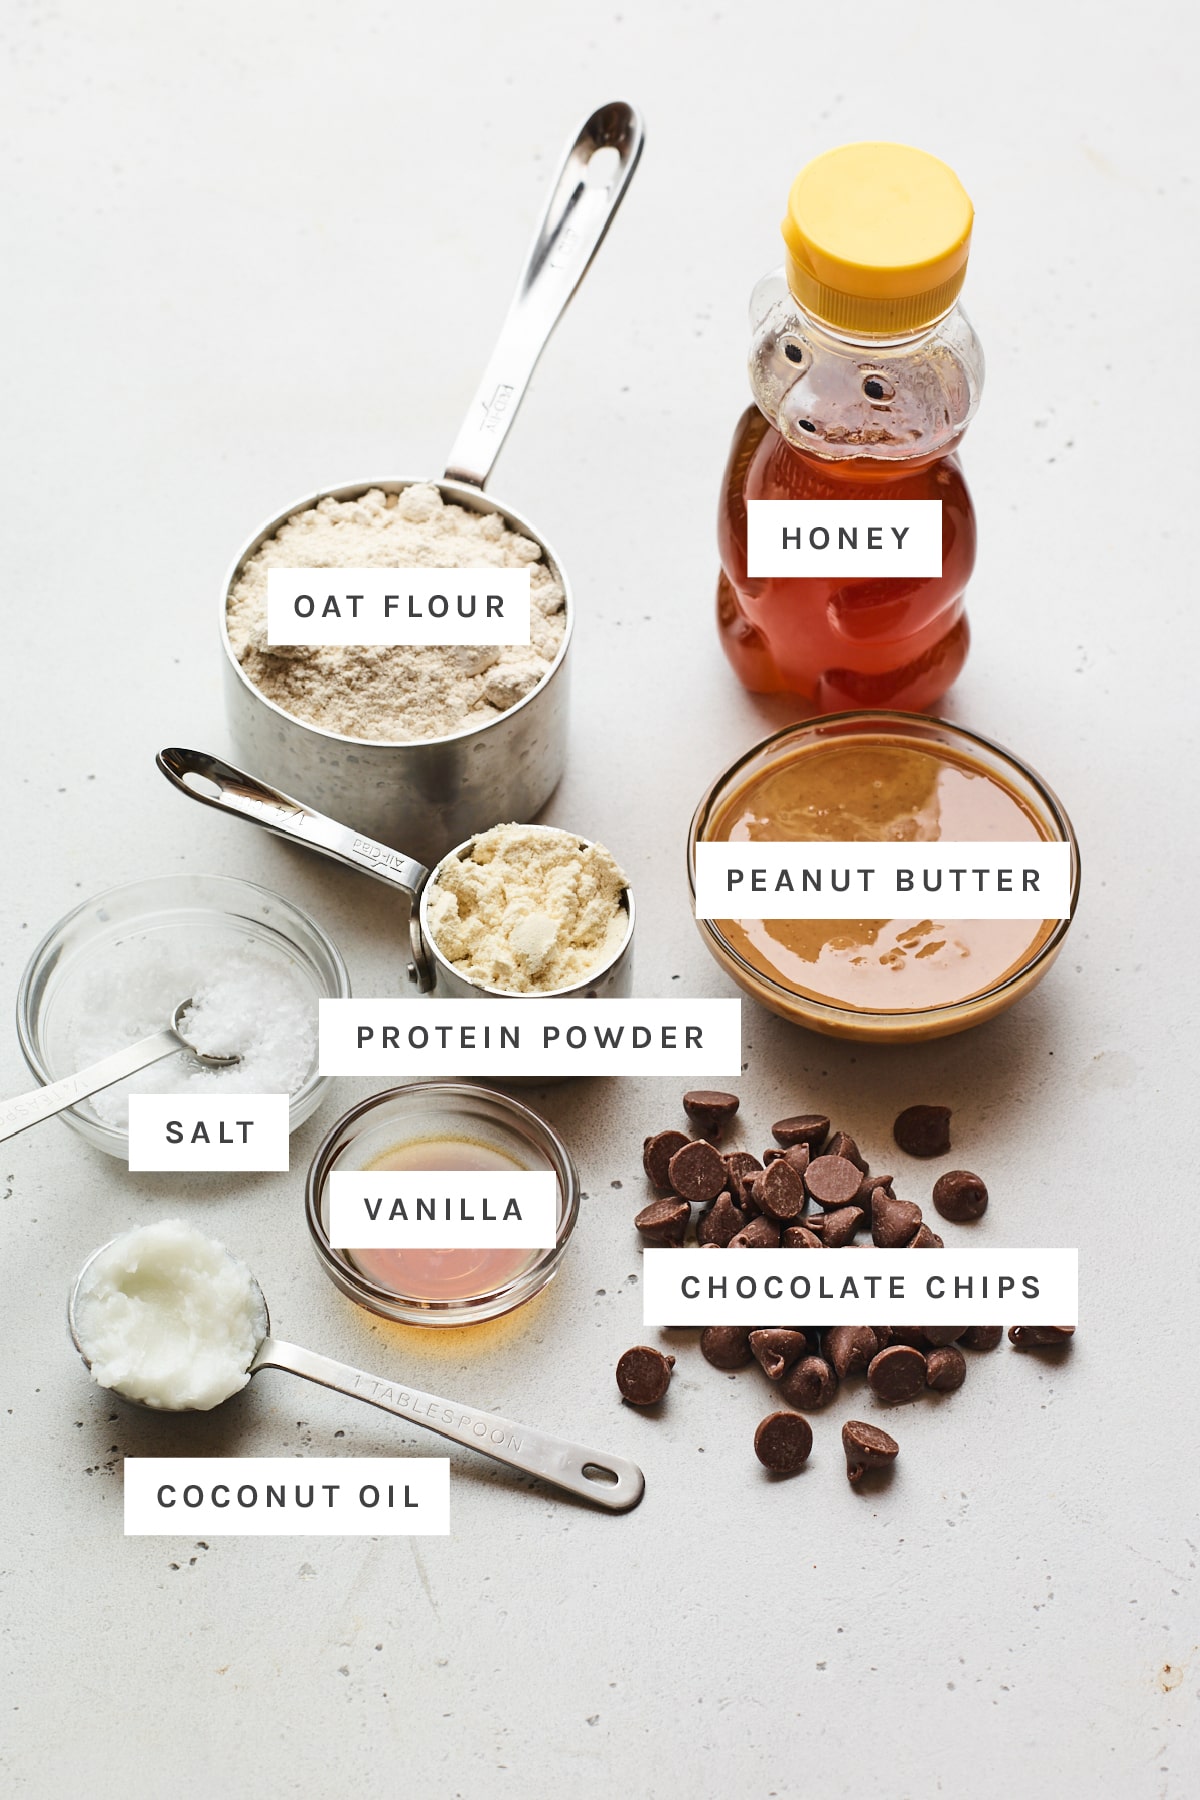 Ingredients measured out to make protein bars: honey, oat flour, protein powder, peanut butter, salt, vanilla, chocolate chips and coconut oil.